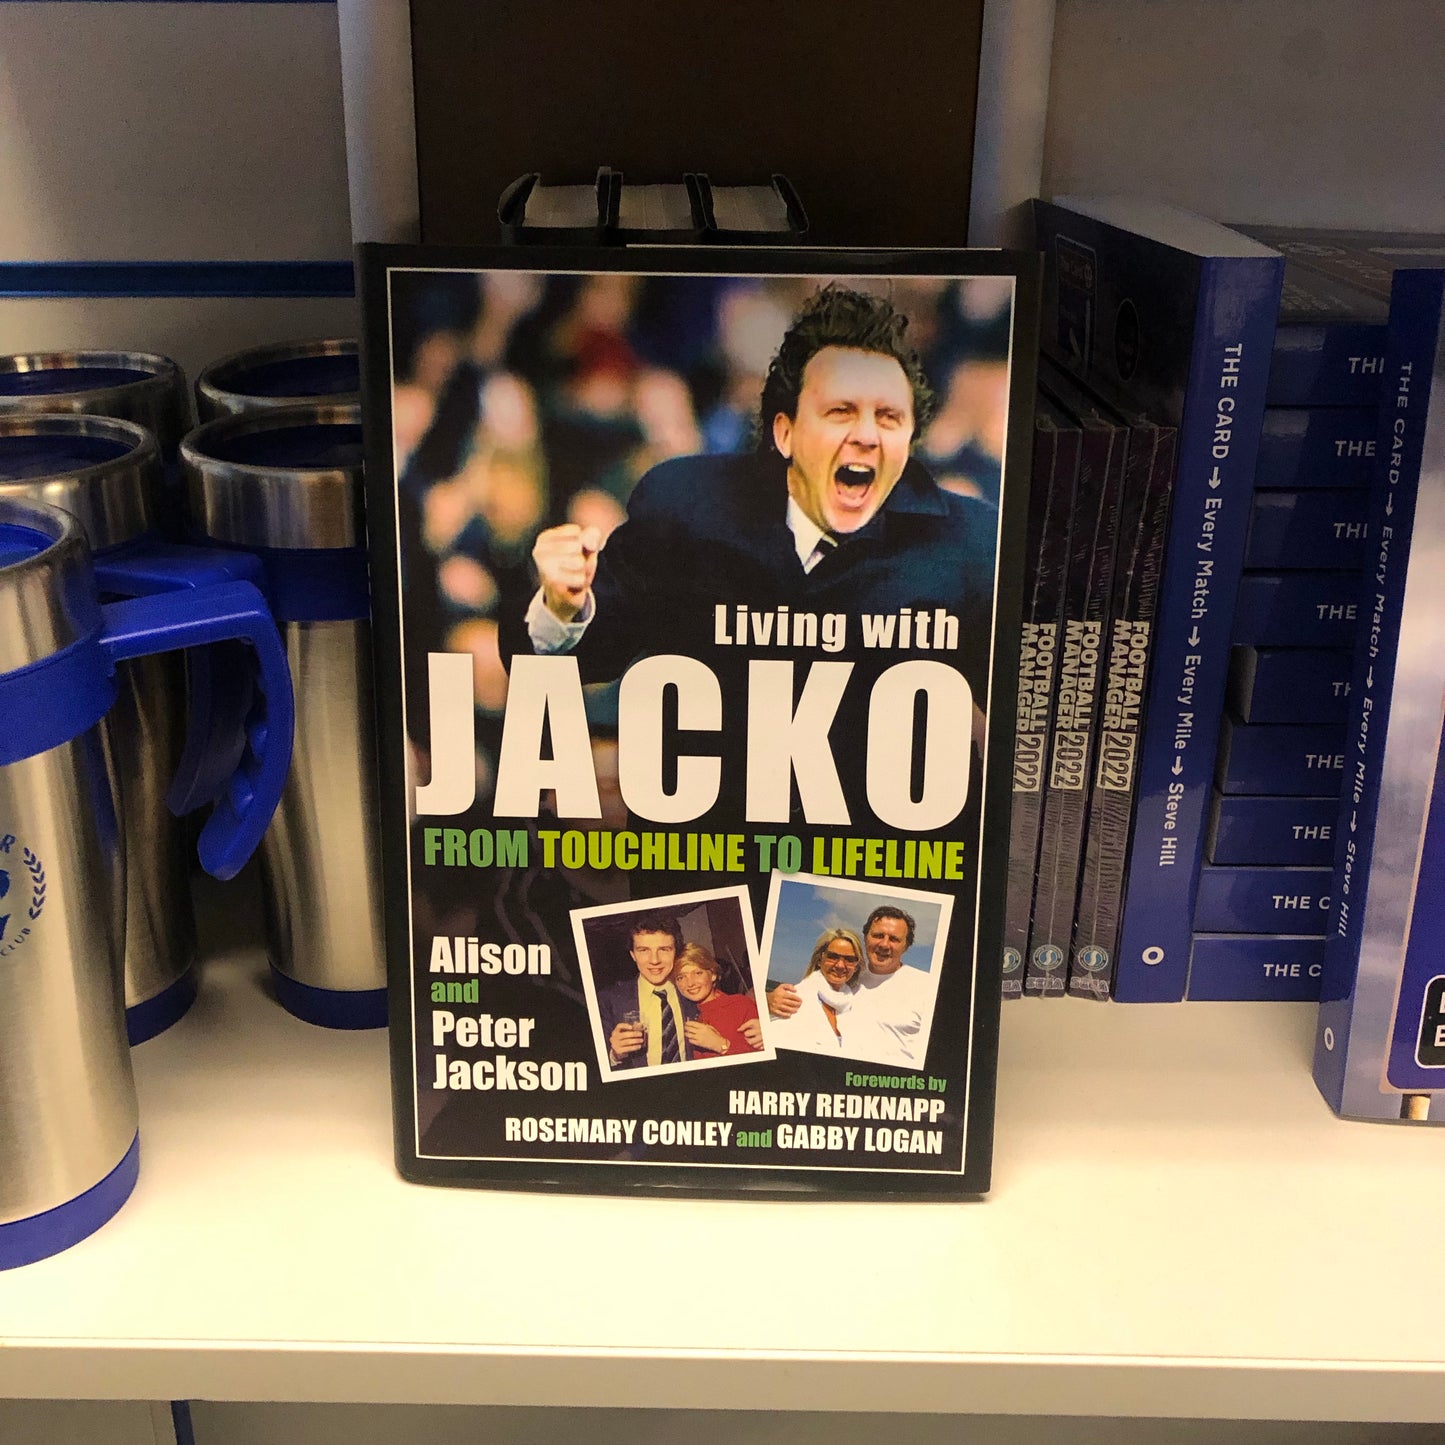 Living with Jacko: From Touchline to Lifeline